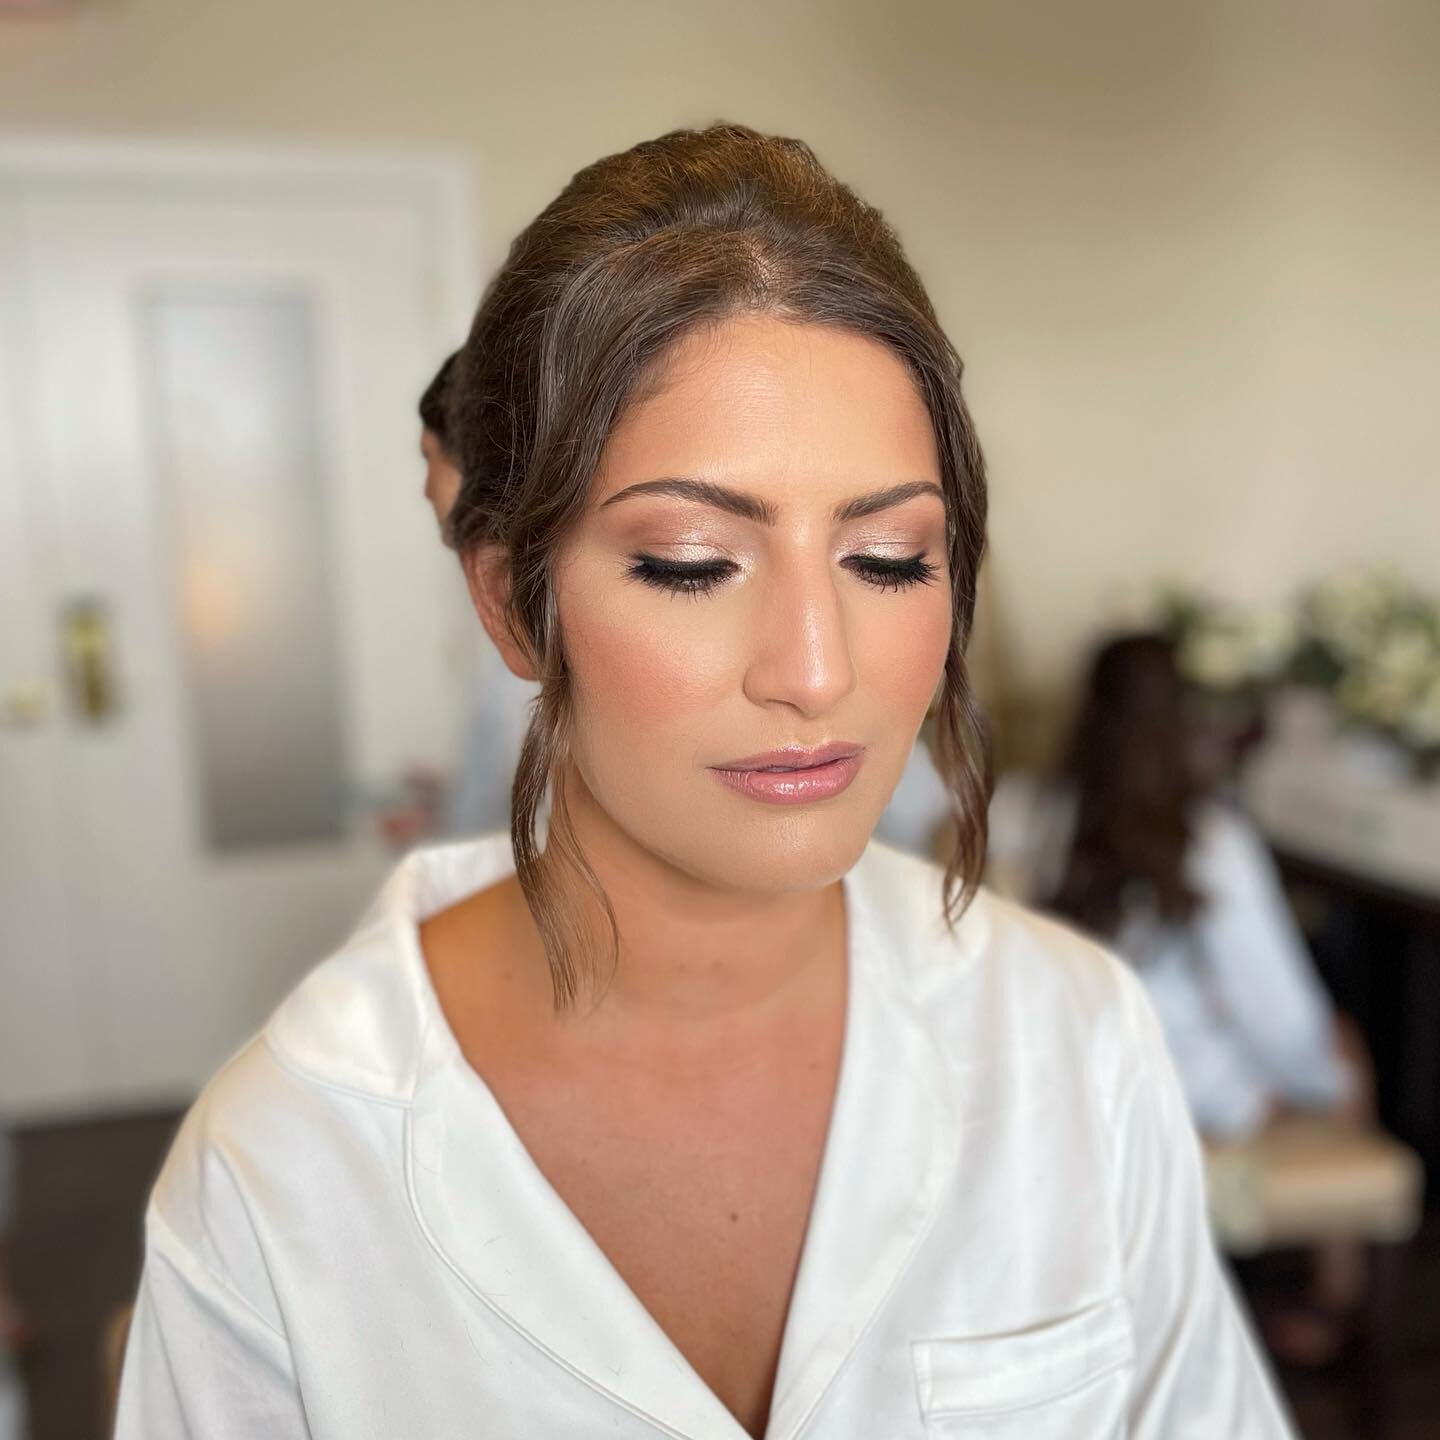 Fridays B E A U T Y of a Bride featuring her freaking incredible brows 🤍 she wanted a soft, dewy skin look for her big day!
Makeup By @makeup_by_melanie_ &bull; Hair By @erin.eggiesalonstudio &bull; @catherine_messina

#MakeupByMelanie #makeup #make